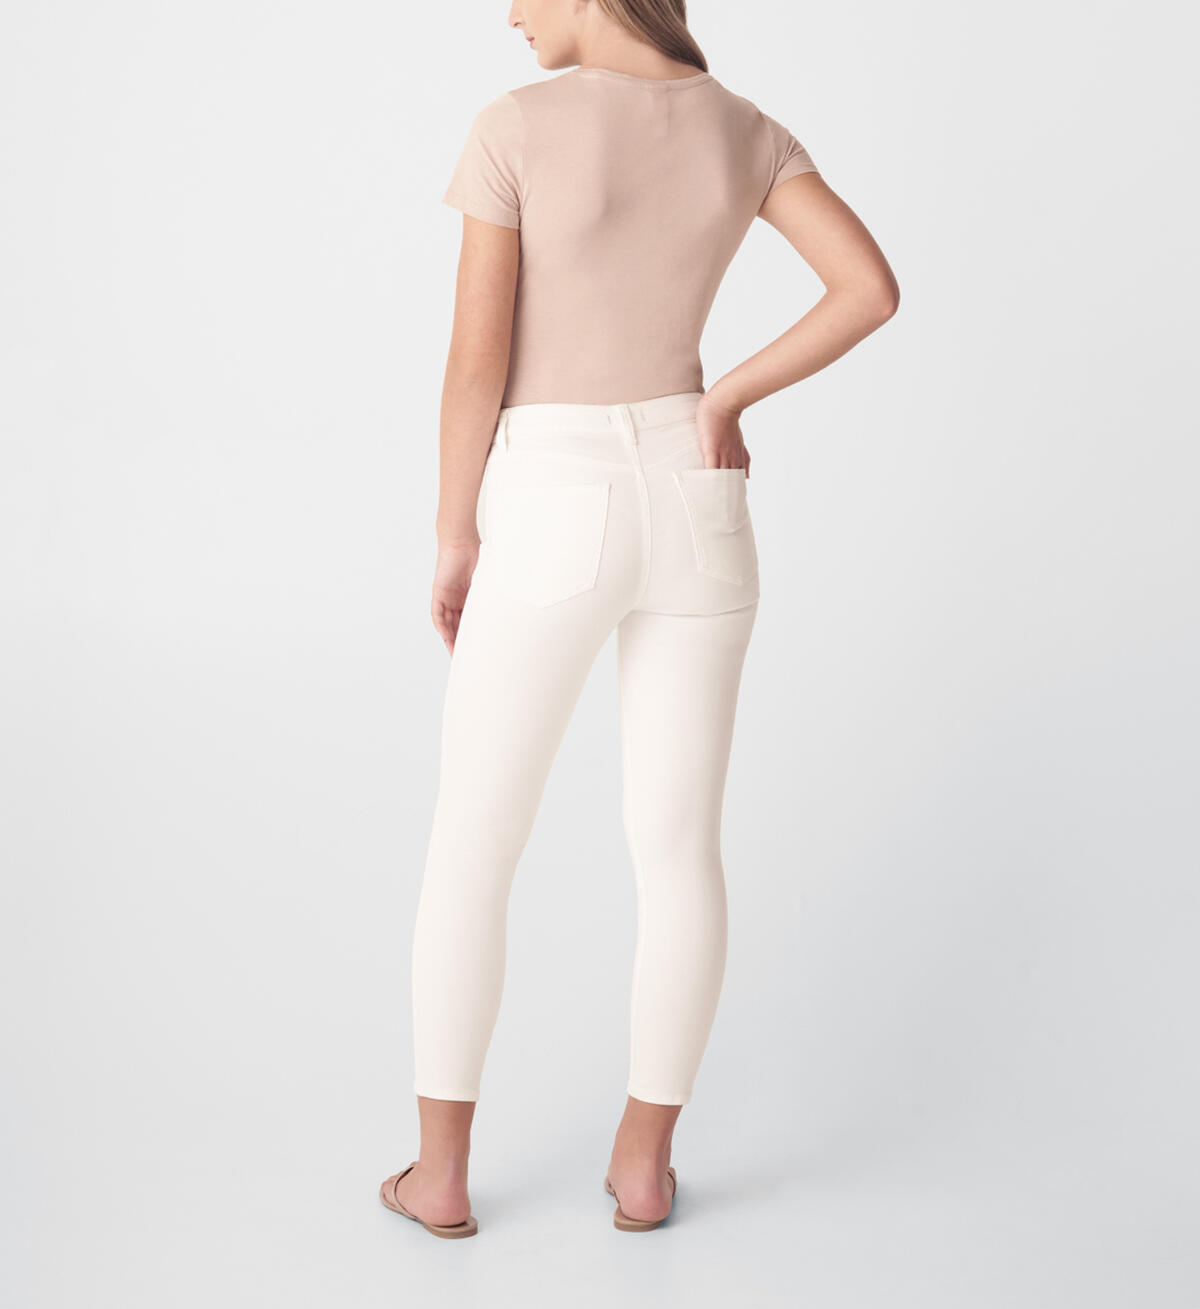 Most Wanted Mid Rise Skinny Jeans, White, hi-res image number 1